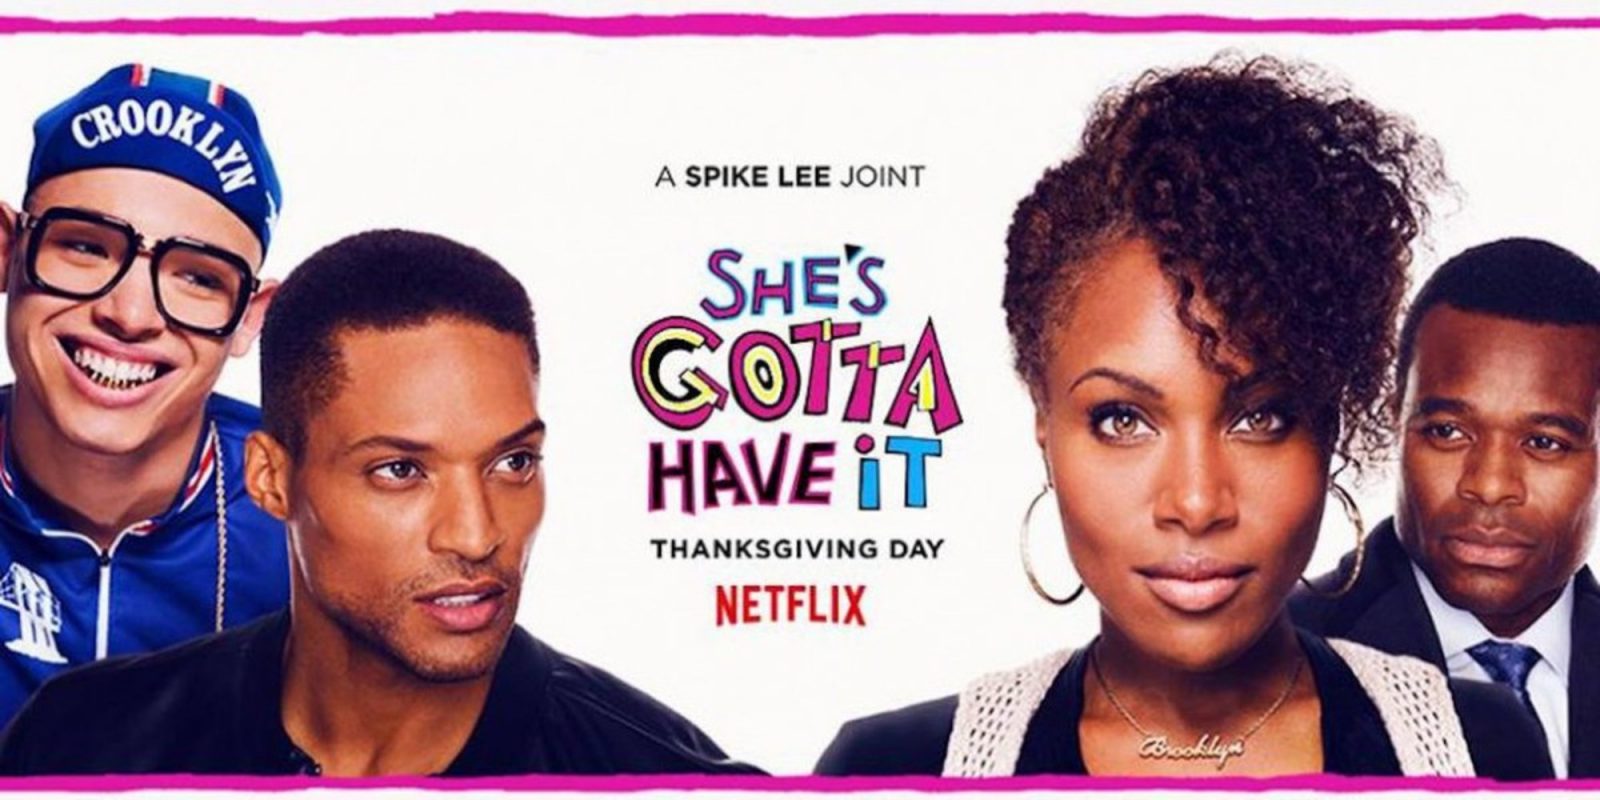 Spike lee's 'she's gotta have it' on netflix